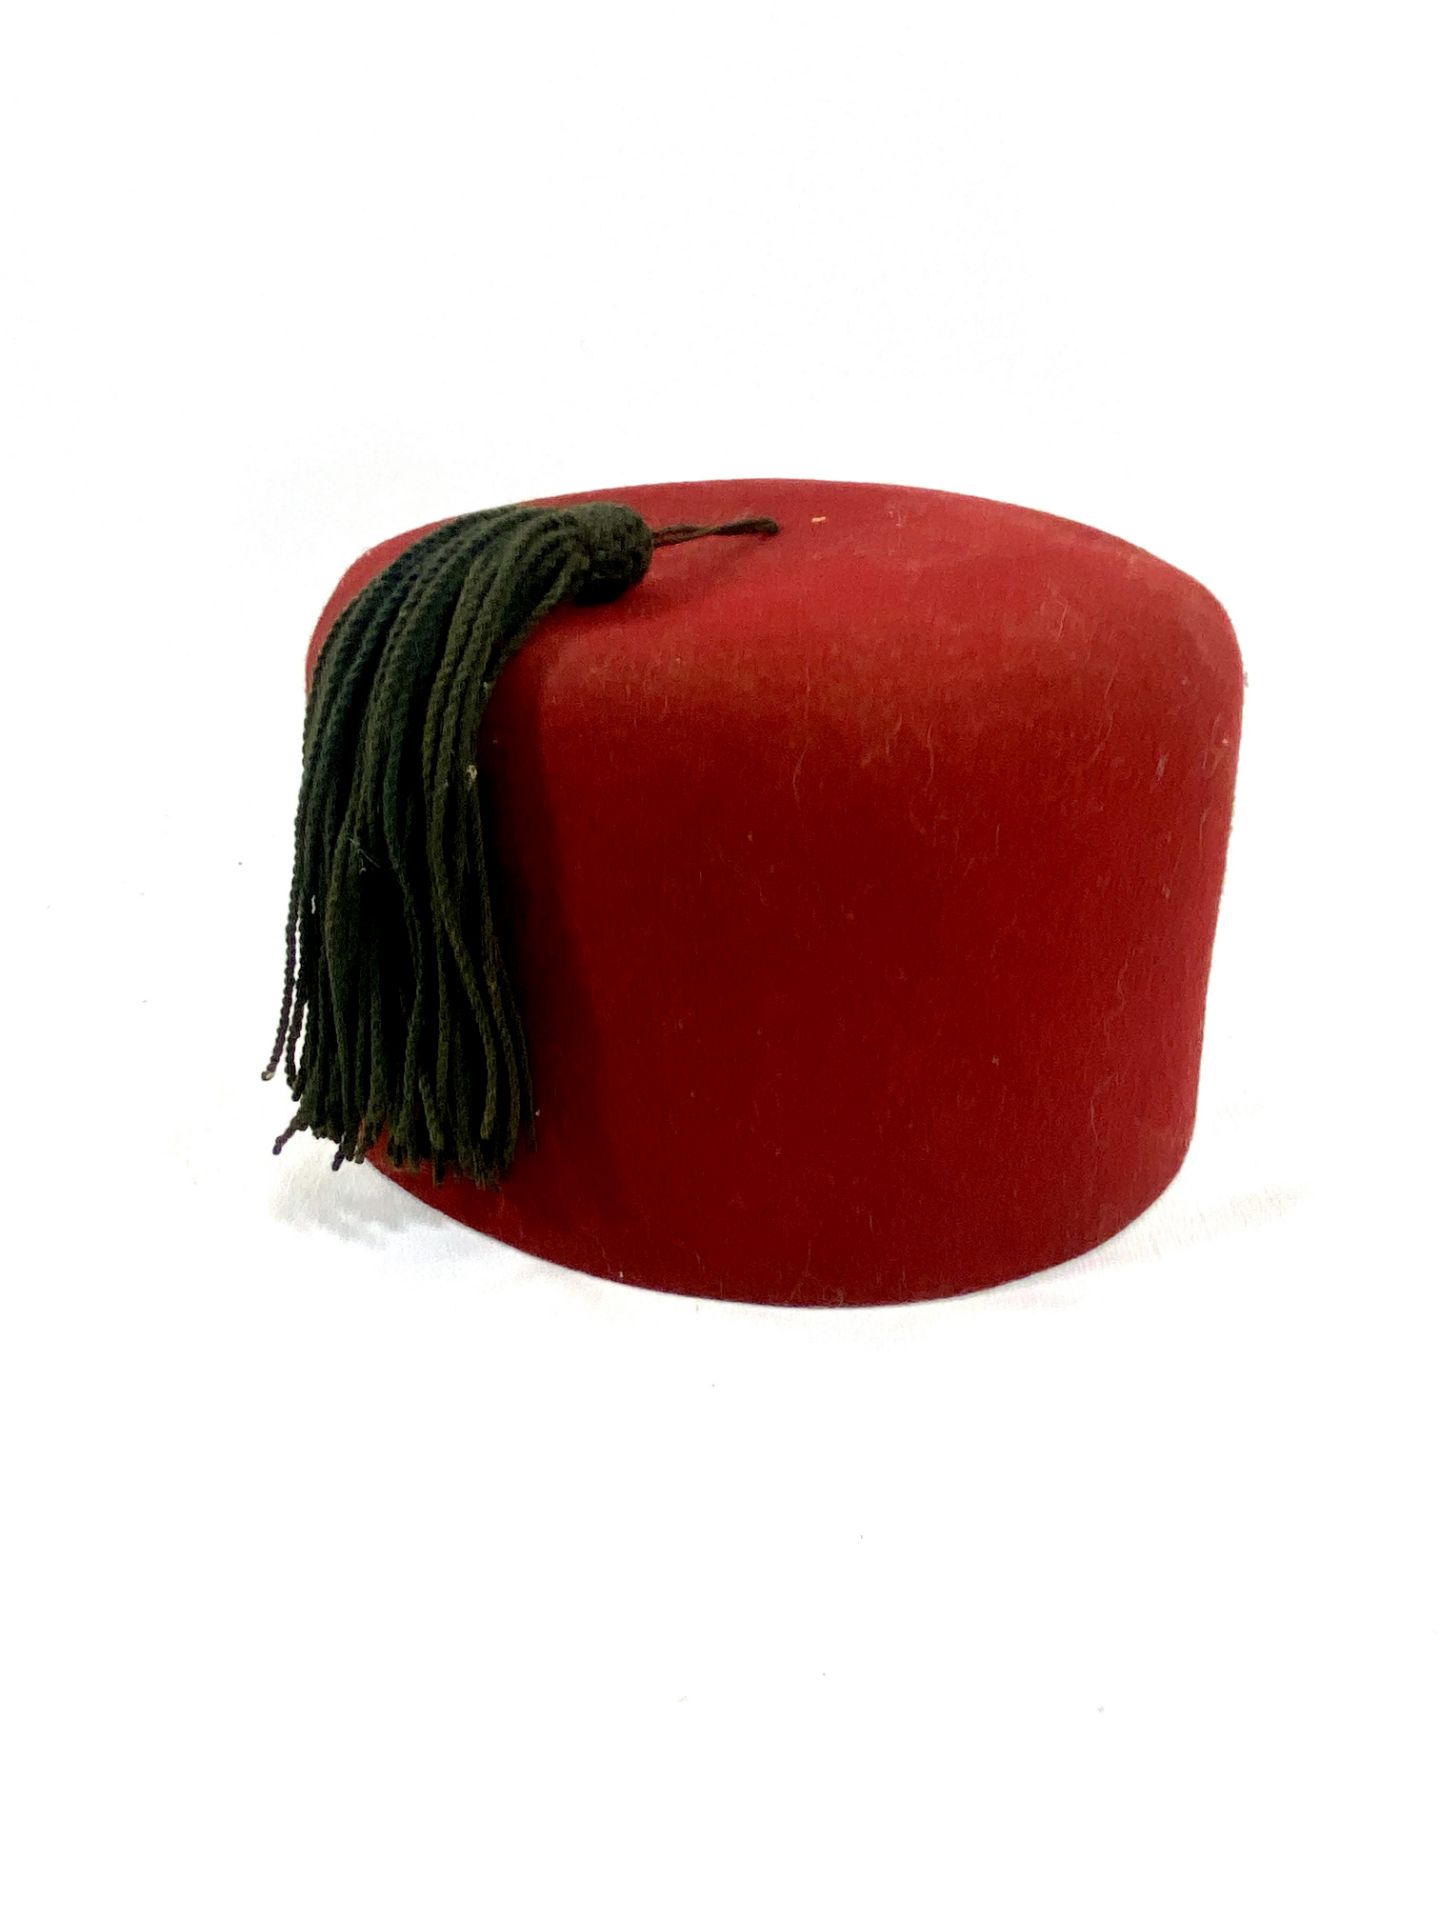 War Department fez, as given by Tommy Cooper - Image 4 of 16